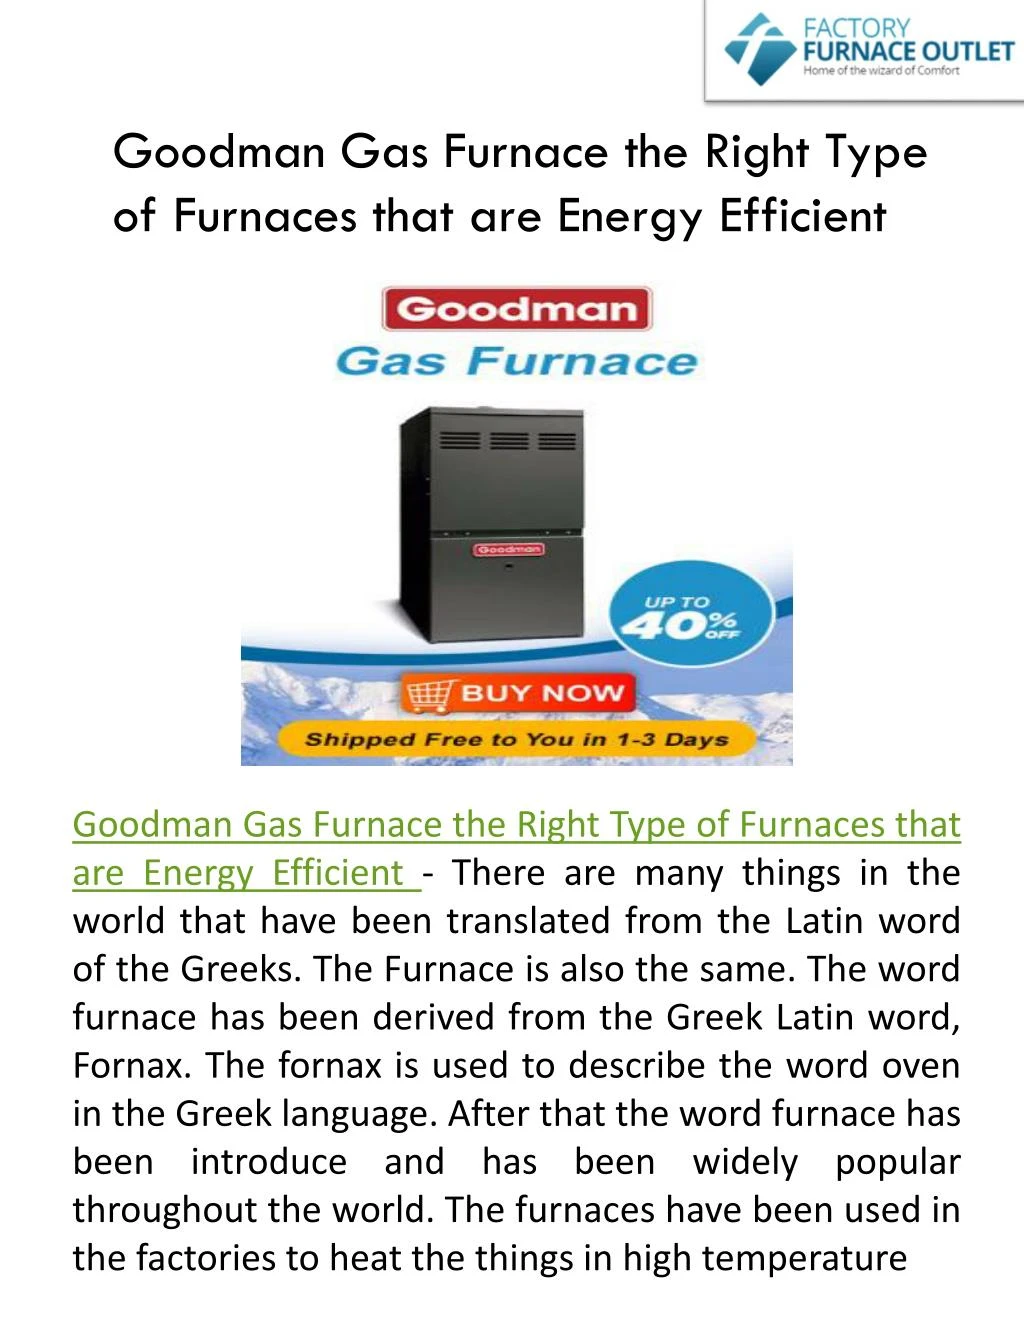 goodman gas furnace the right type of furnaces